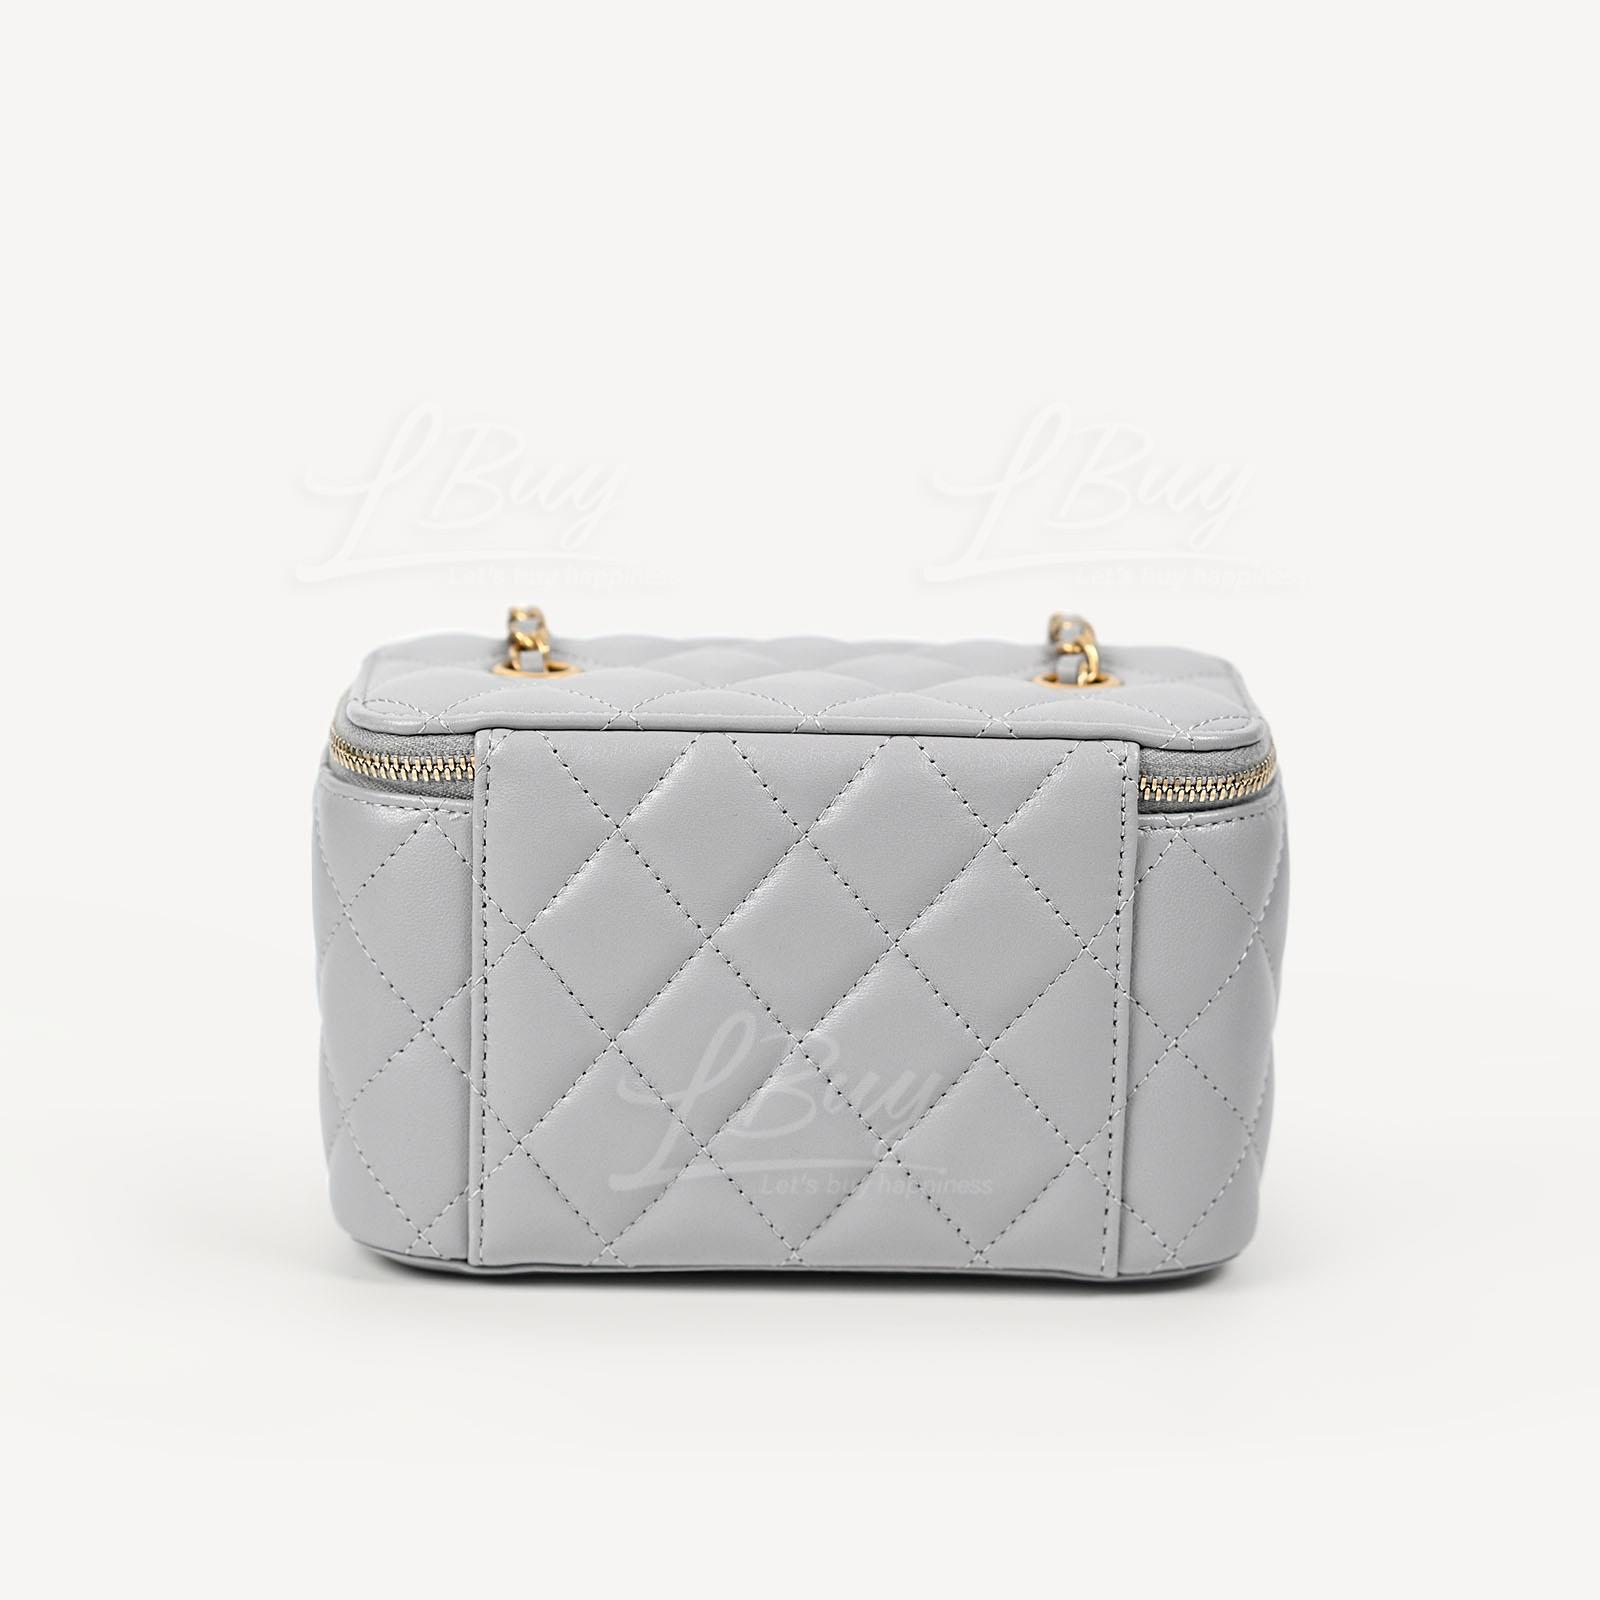 CHANEL-Chanel Gold Ball Grey Long Vanity Case with Chain